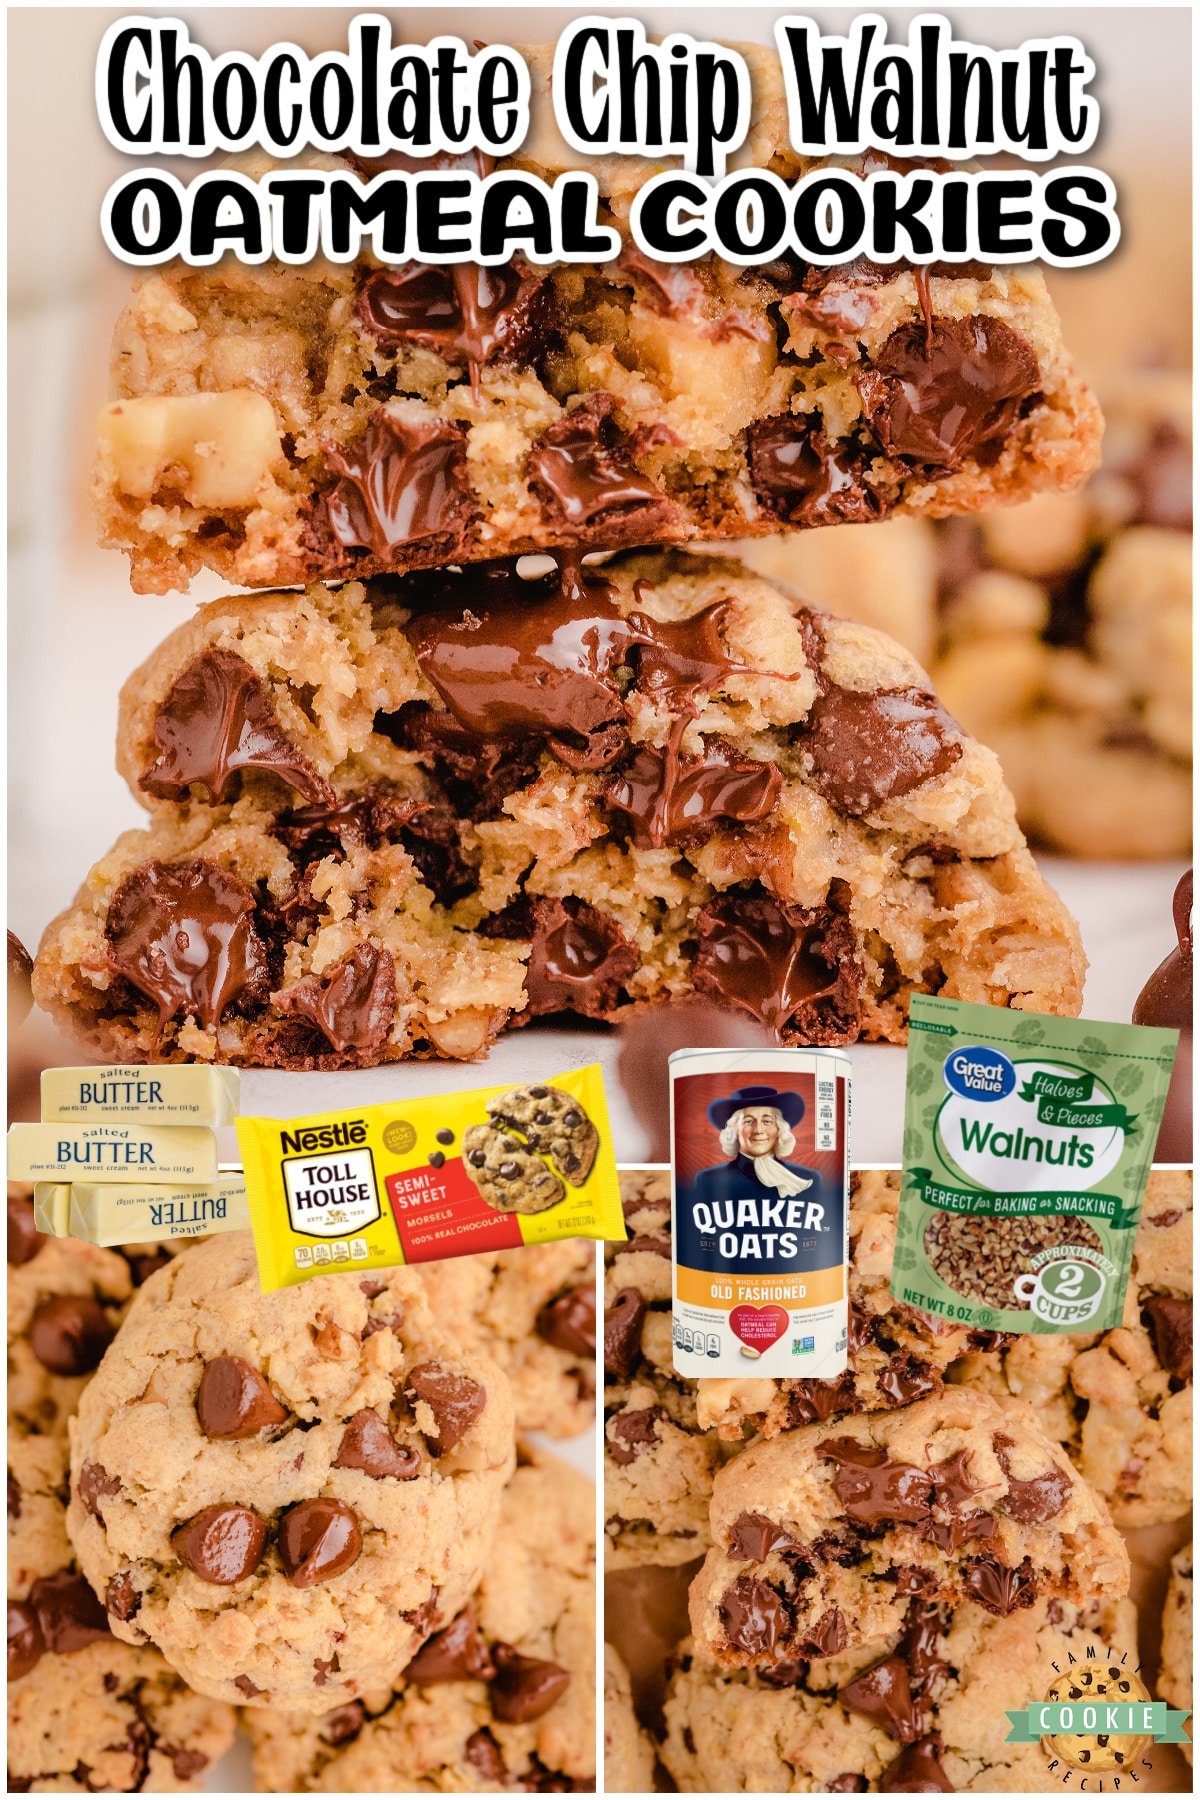 Oatmeal Walnut Chocolate Chip cookies that are soft, chewy and studded with tons of chocolate! These loaded oatmeal cookies have crisp buttery edges & gooey centers; they're the perfect cookie!